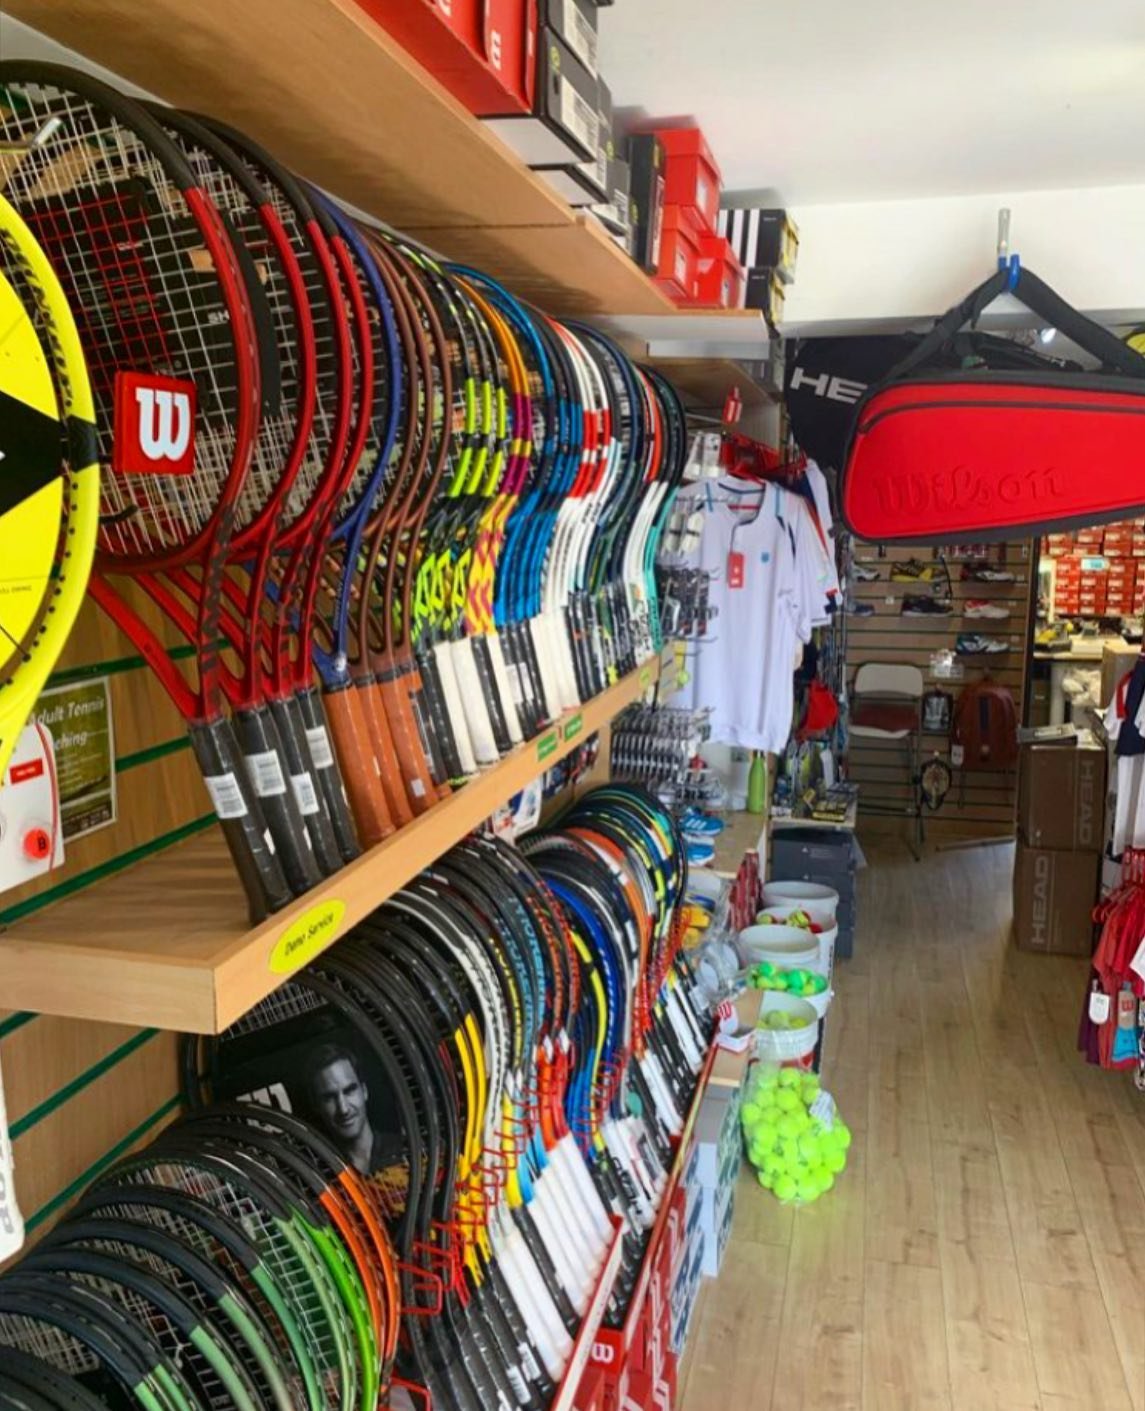 Based in Otford, The Racquet Academy is a professional racquet store providing a great range of performance equipment!🏓

Their team of friendly, professional tennis coaches and players offer specialist racquet advice, including Tennis, Badminton and